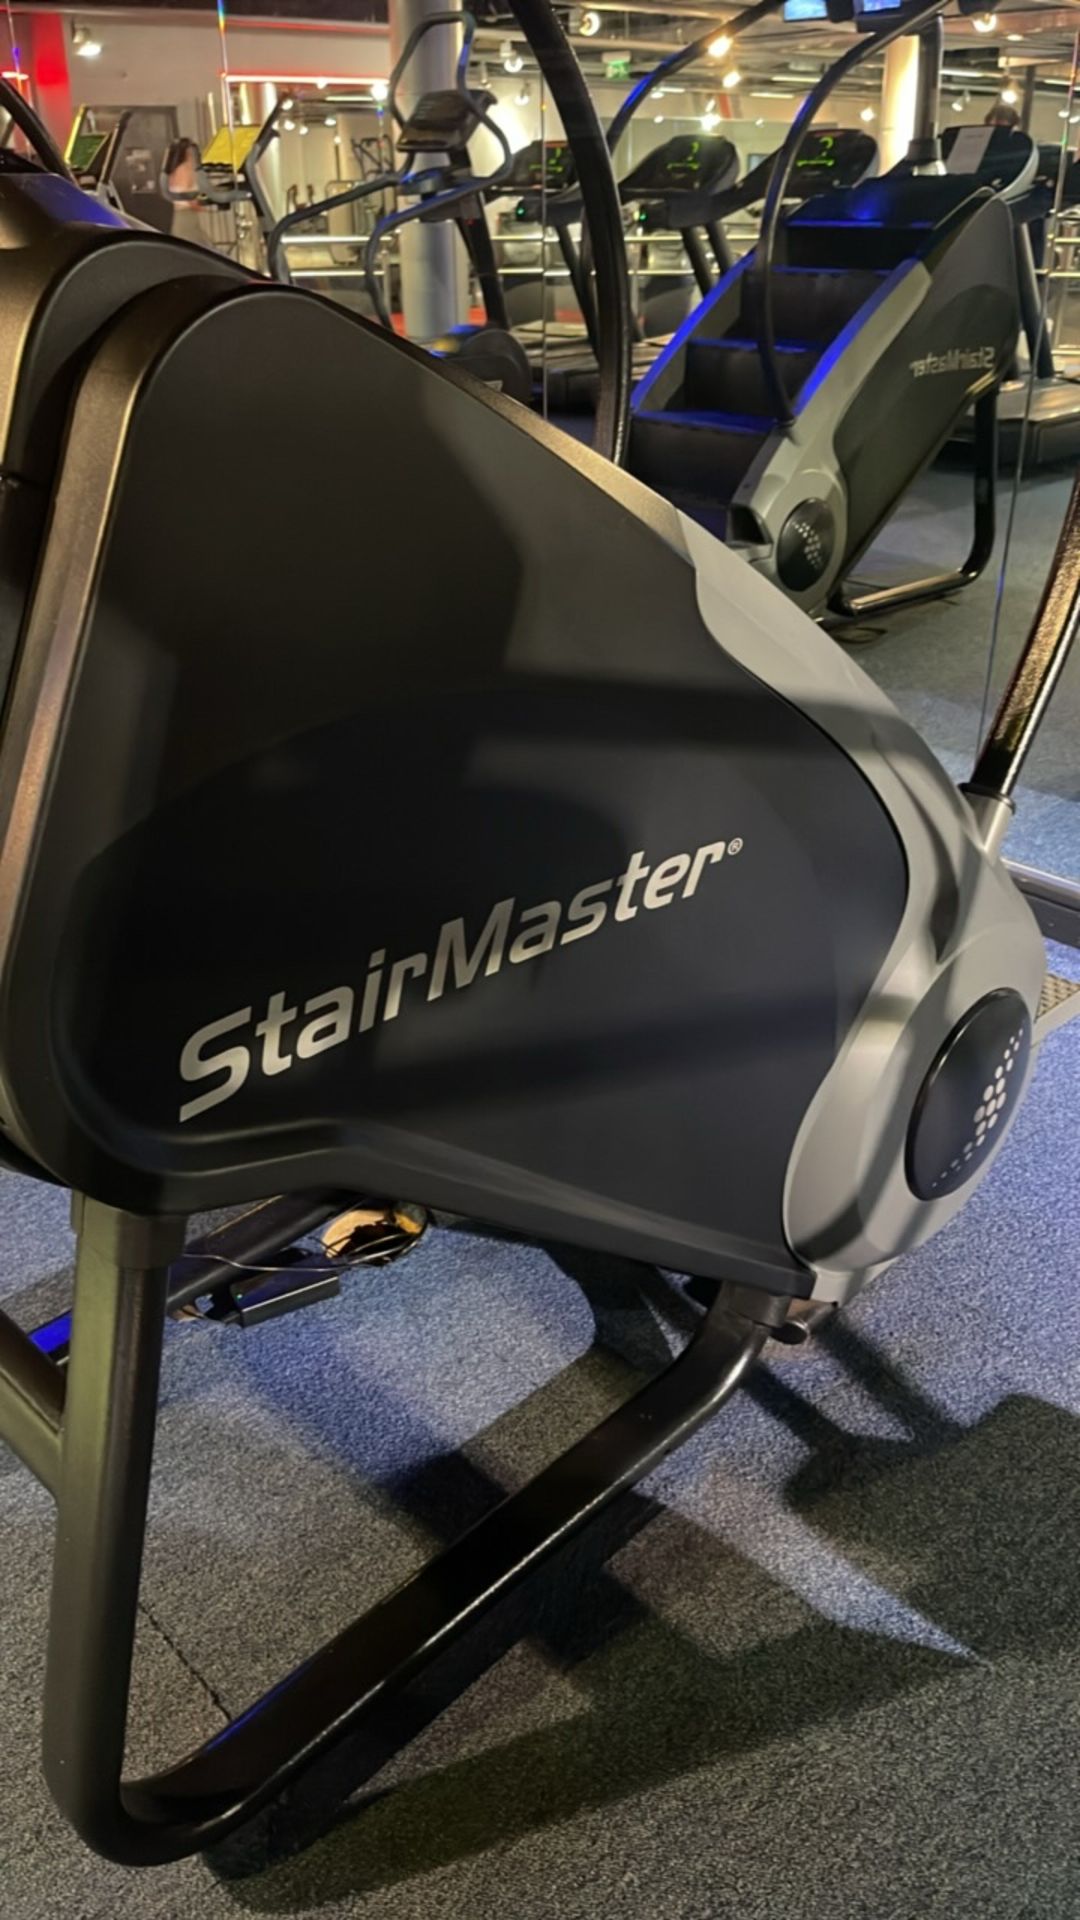 Stairmaster - Image 3 of 8